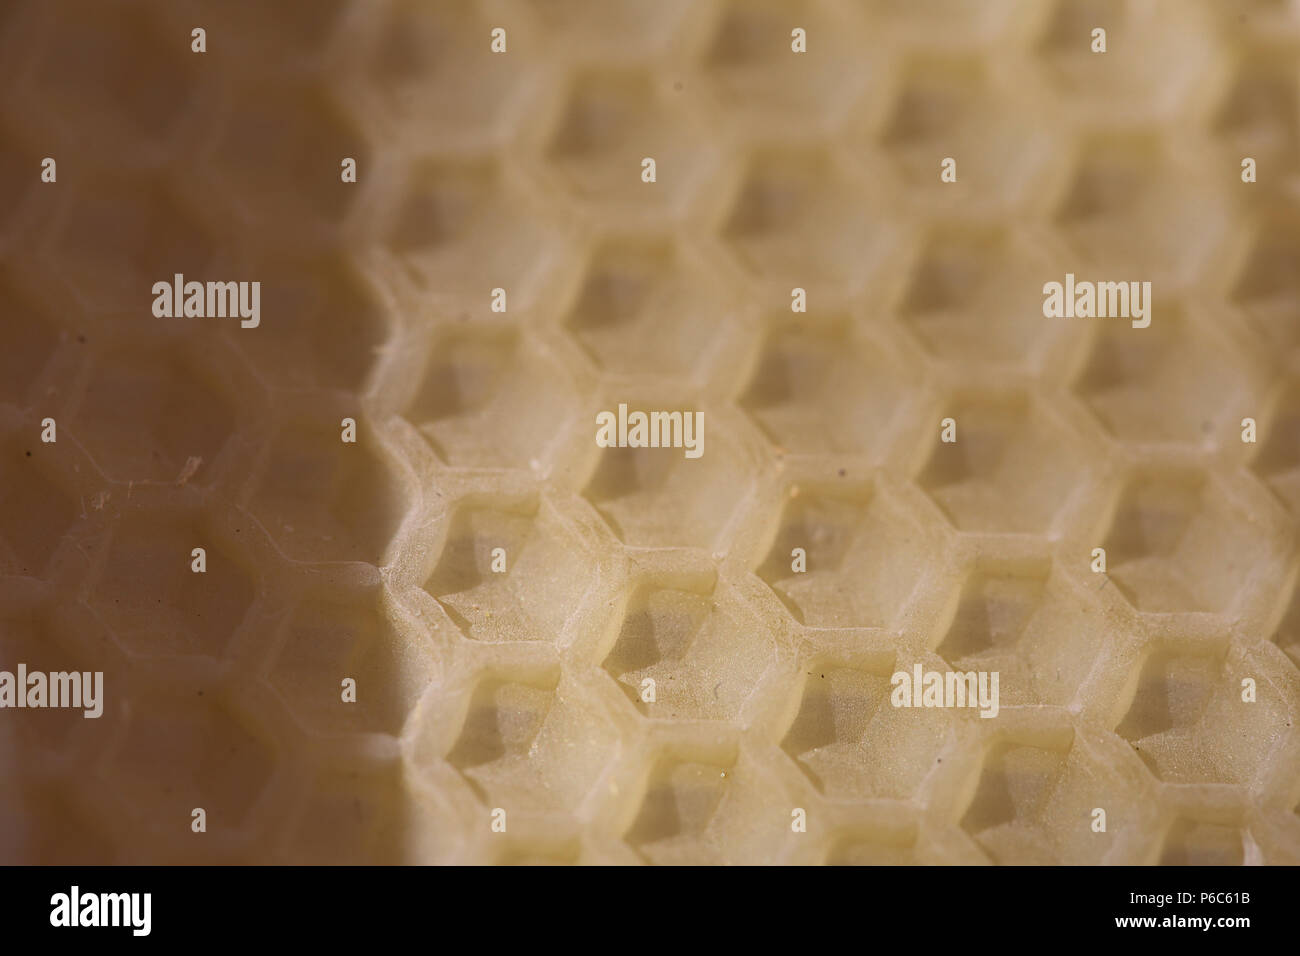 Berlin, Germany - Setting of the outline of honeycombs on a wax plate Stock Photo